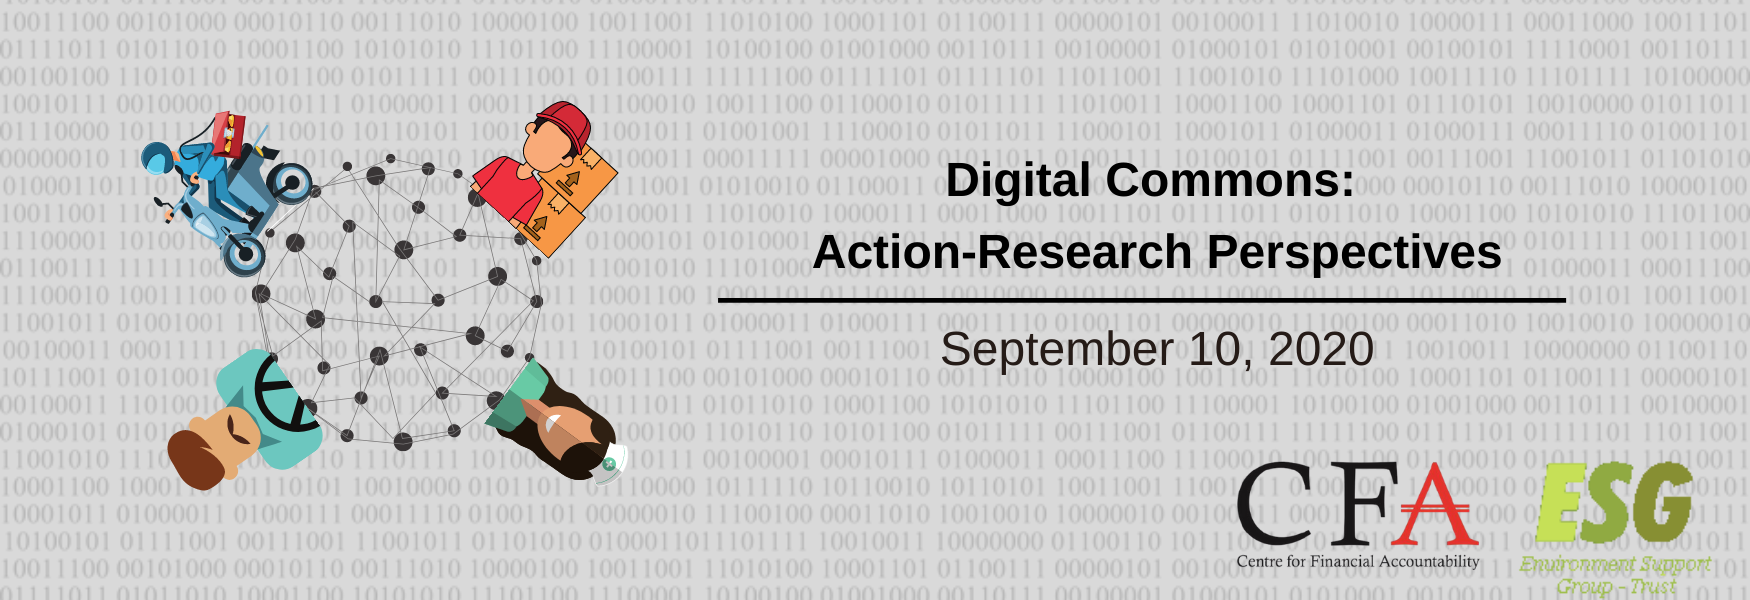 Digital Commons: Action-Research Perspectives